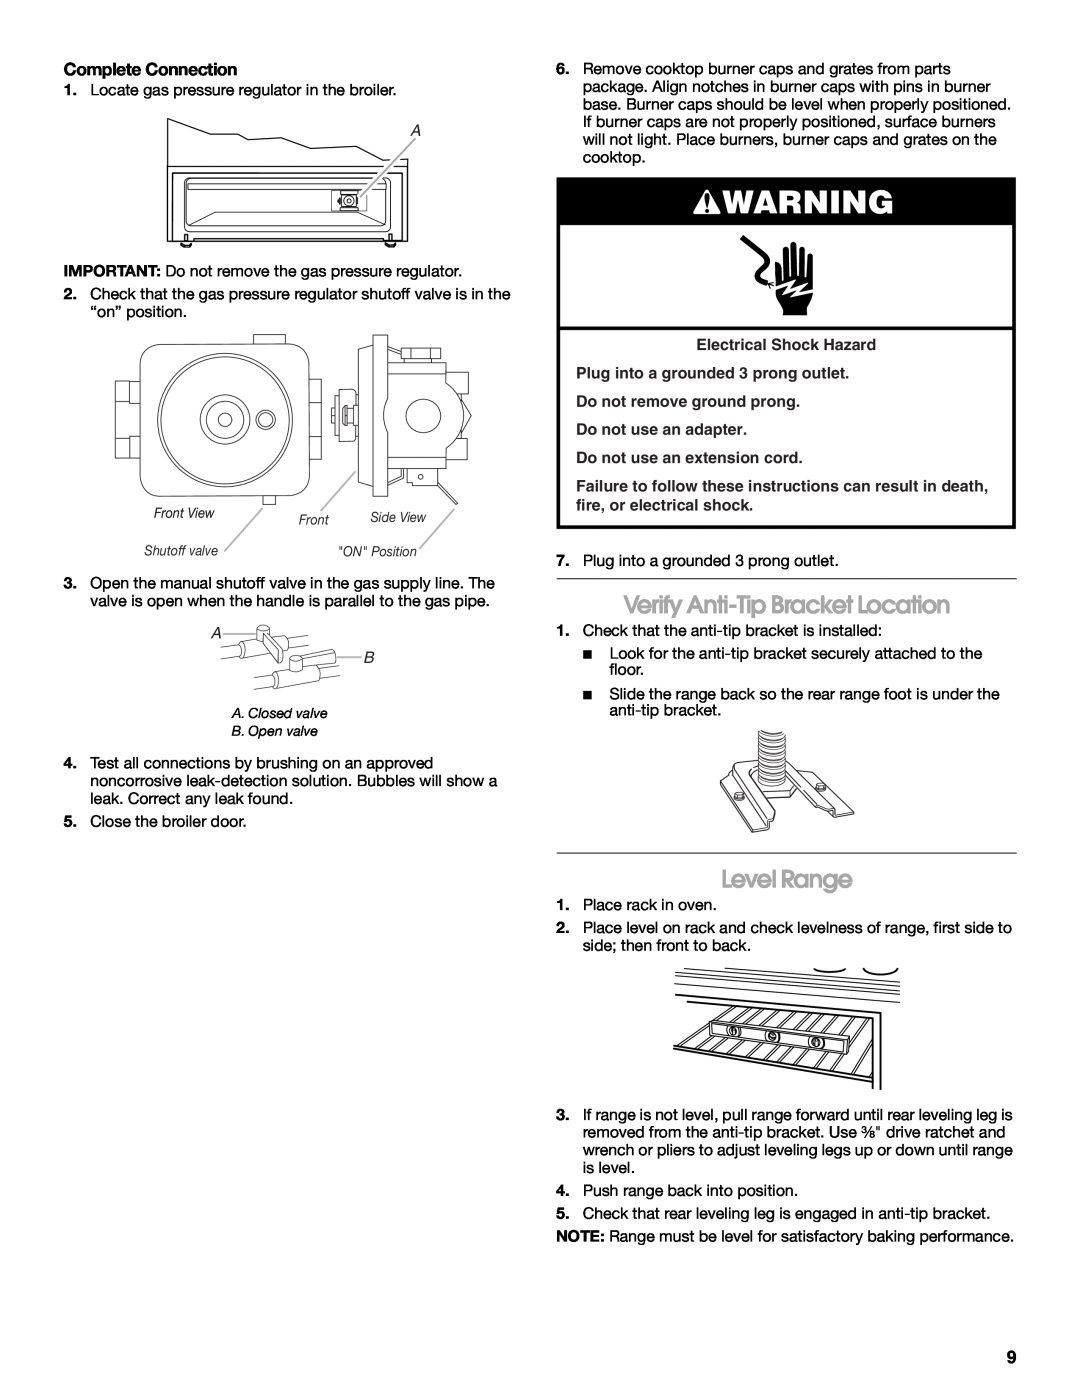 Whirlpool W10200946A installation instructions Verify Anti-Tip Bracket Location, Level Range, Complete Connection 